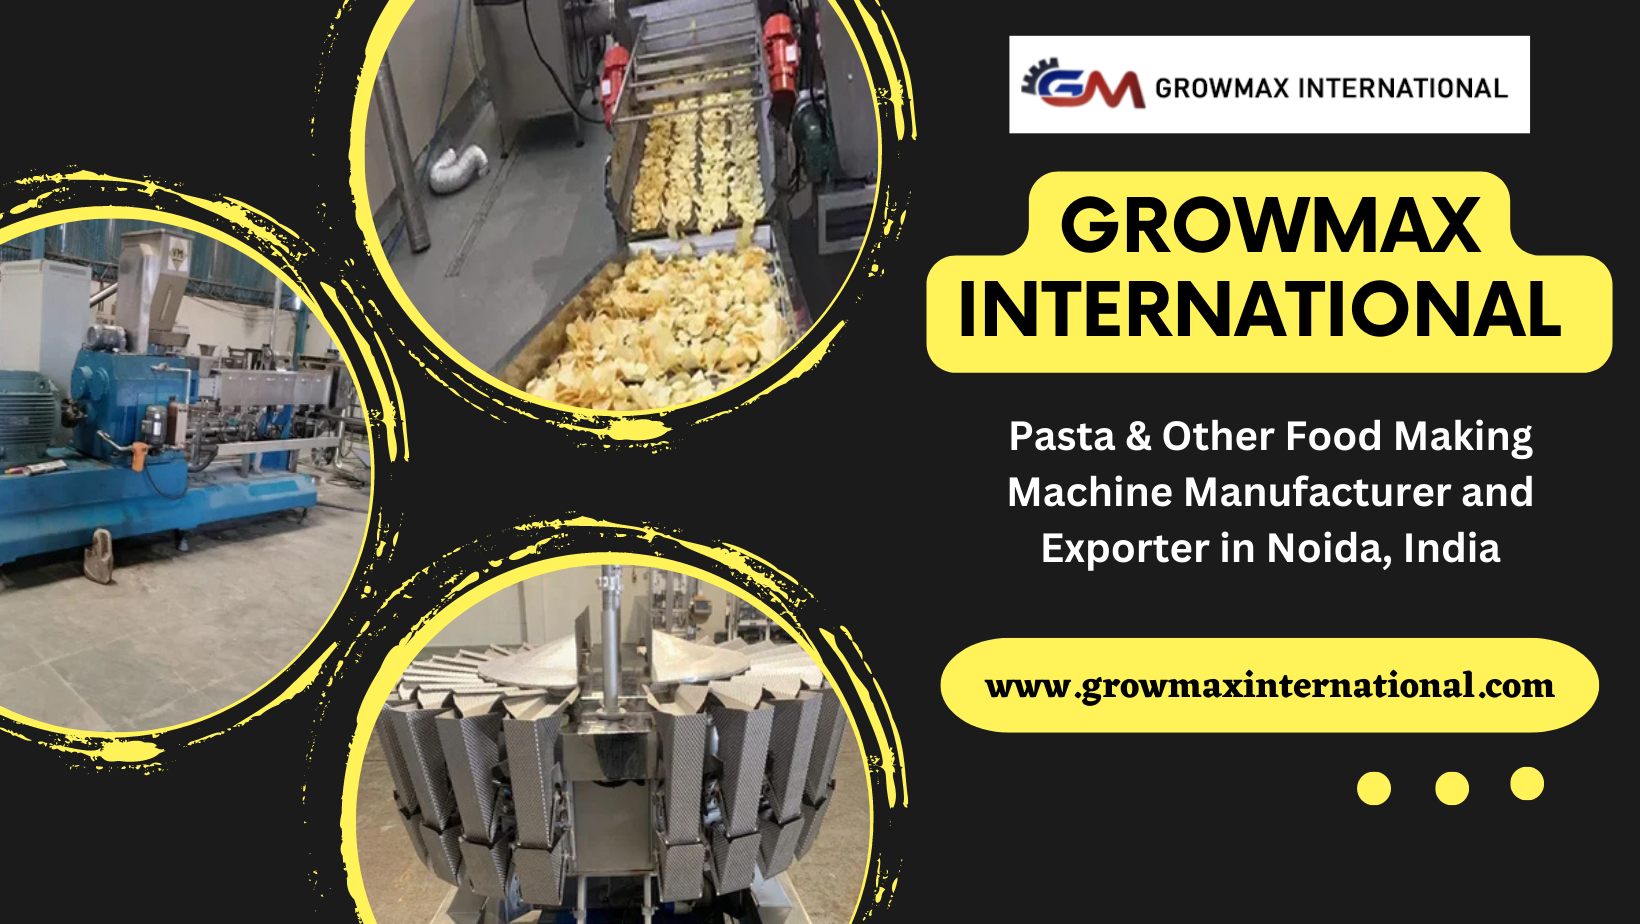 Pasta & Other Food Making
Machine Manufacturer and
Exporter in Noida, India

www .growmaxinternational.com